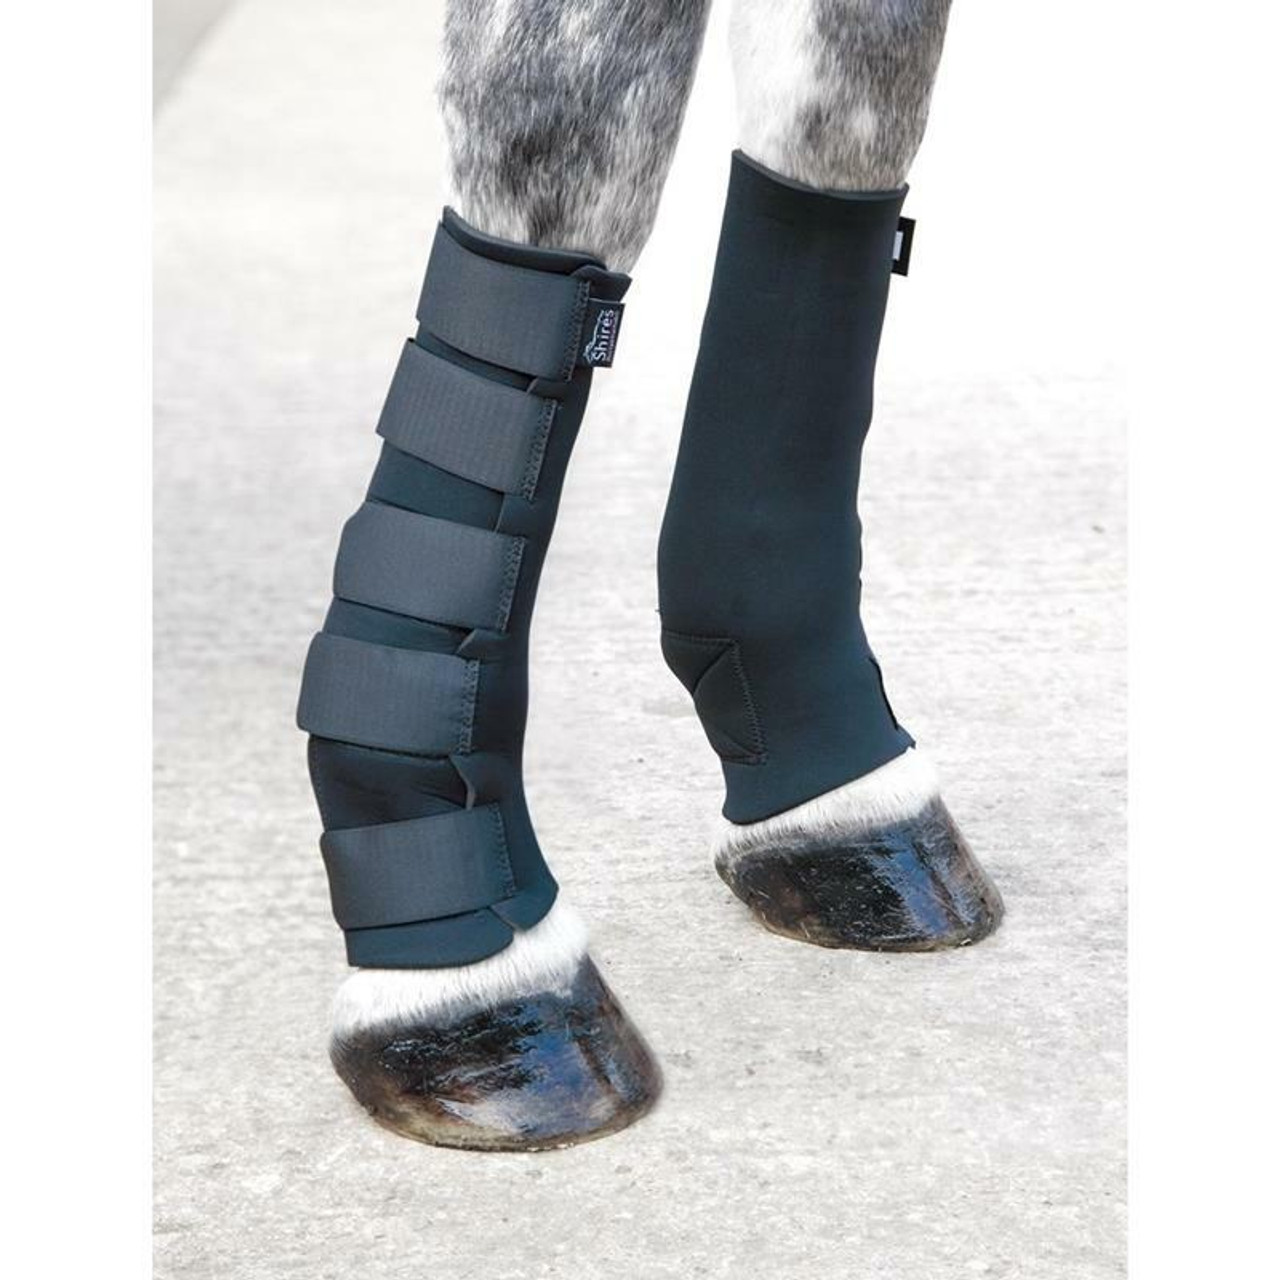 ARMA Fly Turnout Socks for Horses